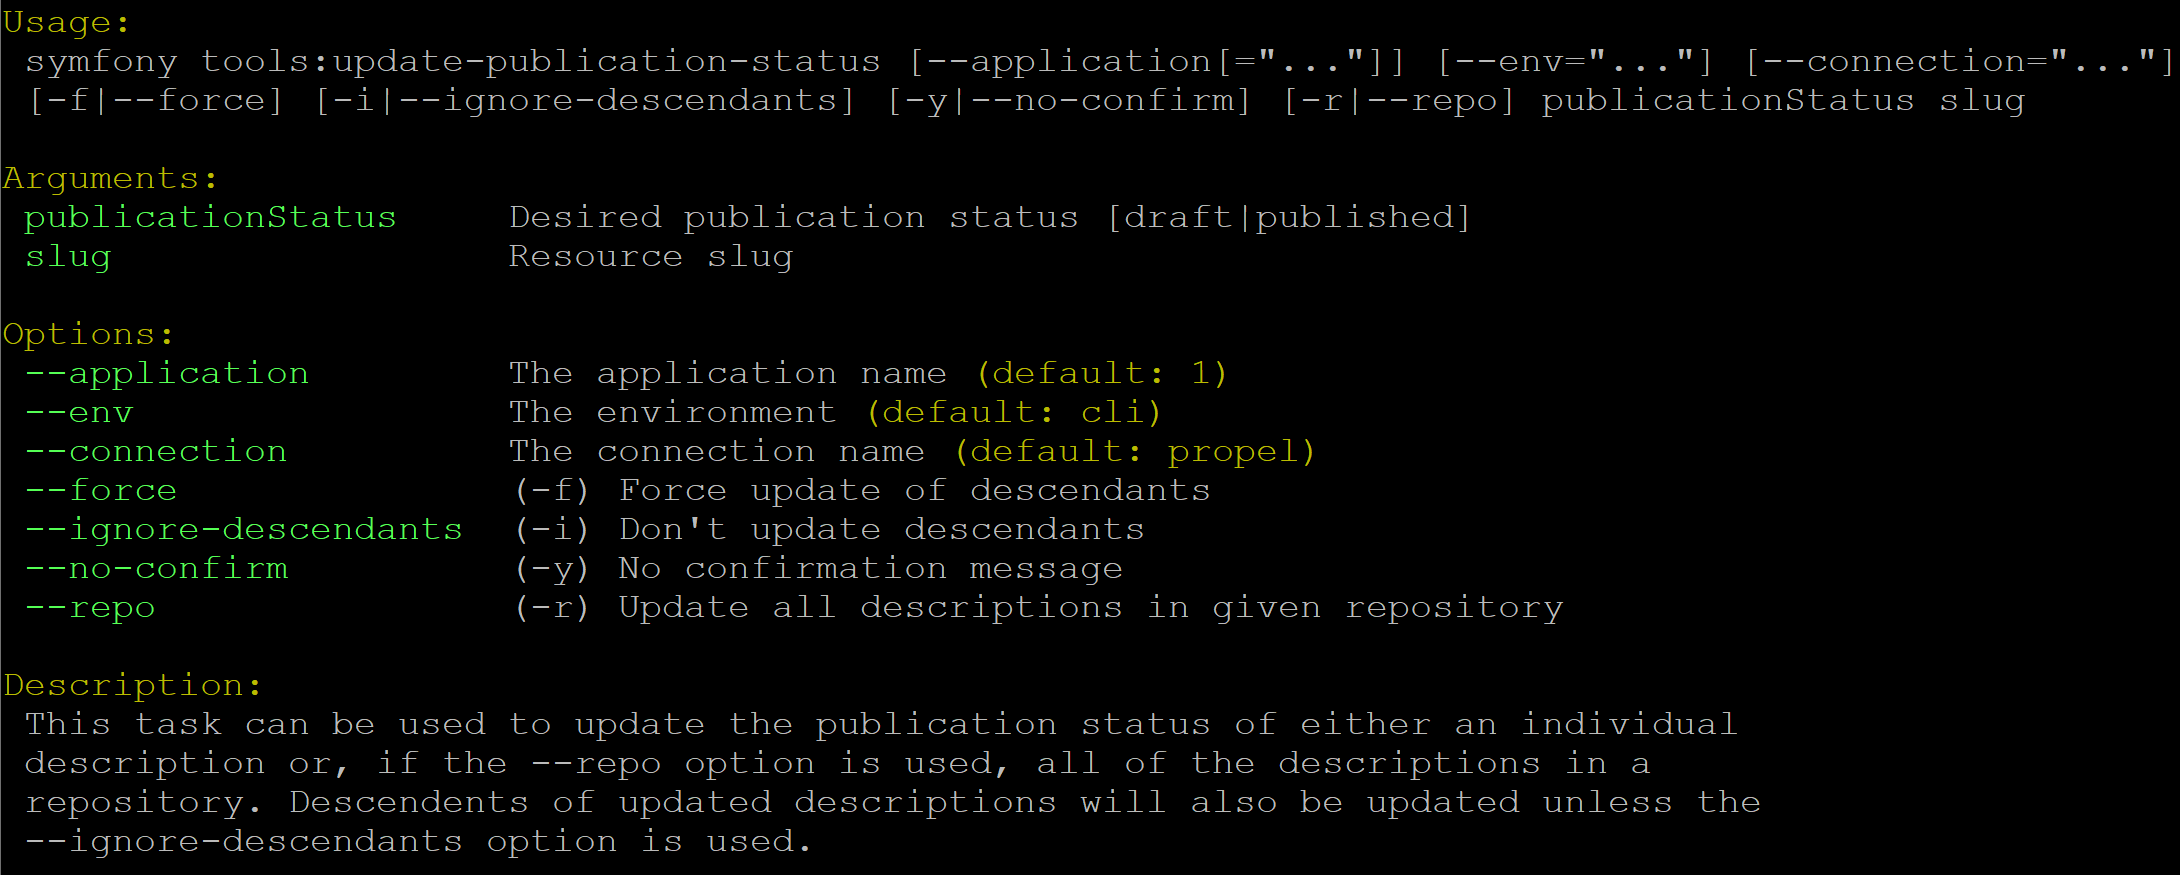 The CLI options when invoking the publication status command